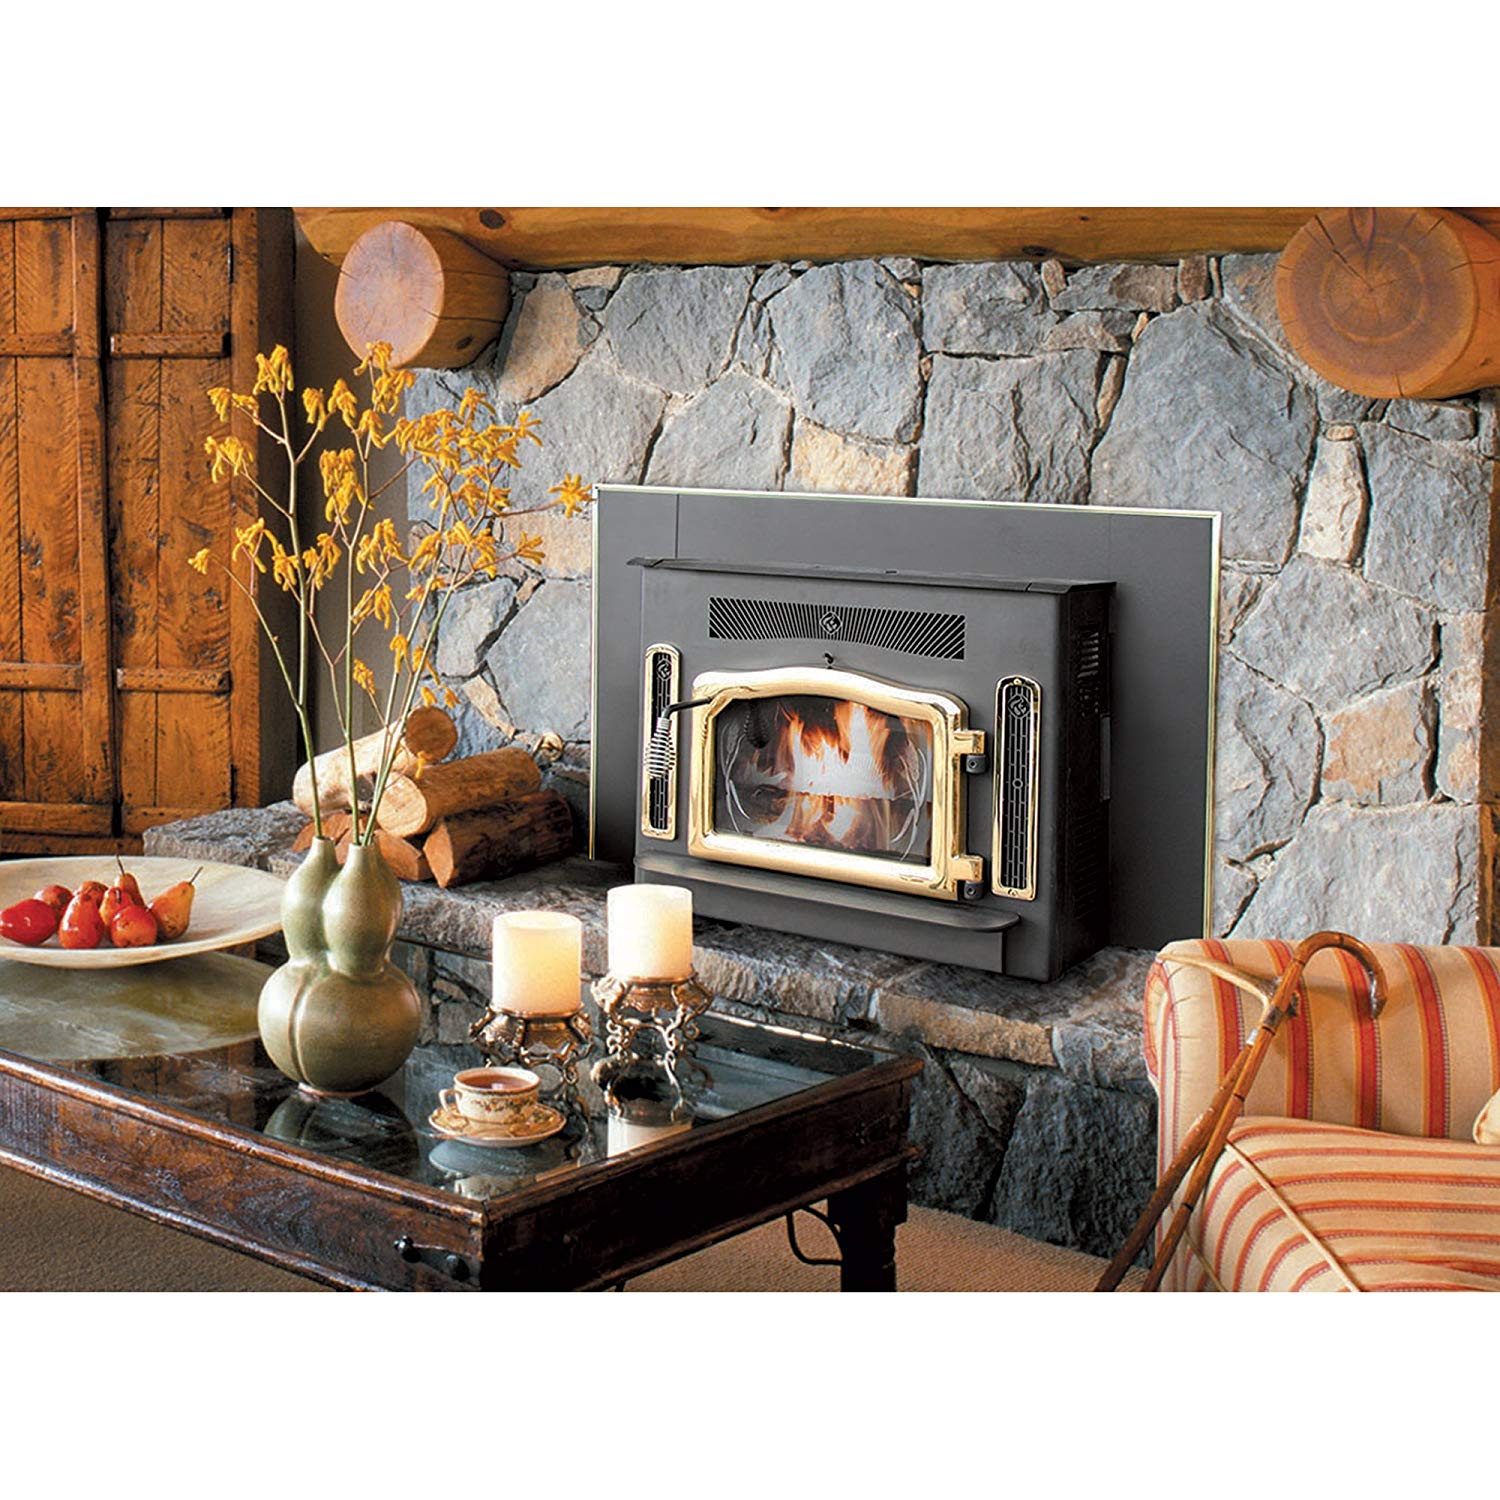 Country Flame Fireplace Insert Unique Country Flame Fireplace Cauri